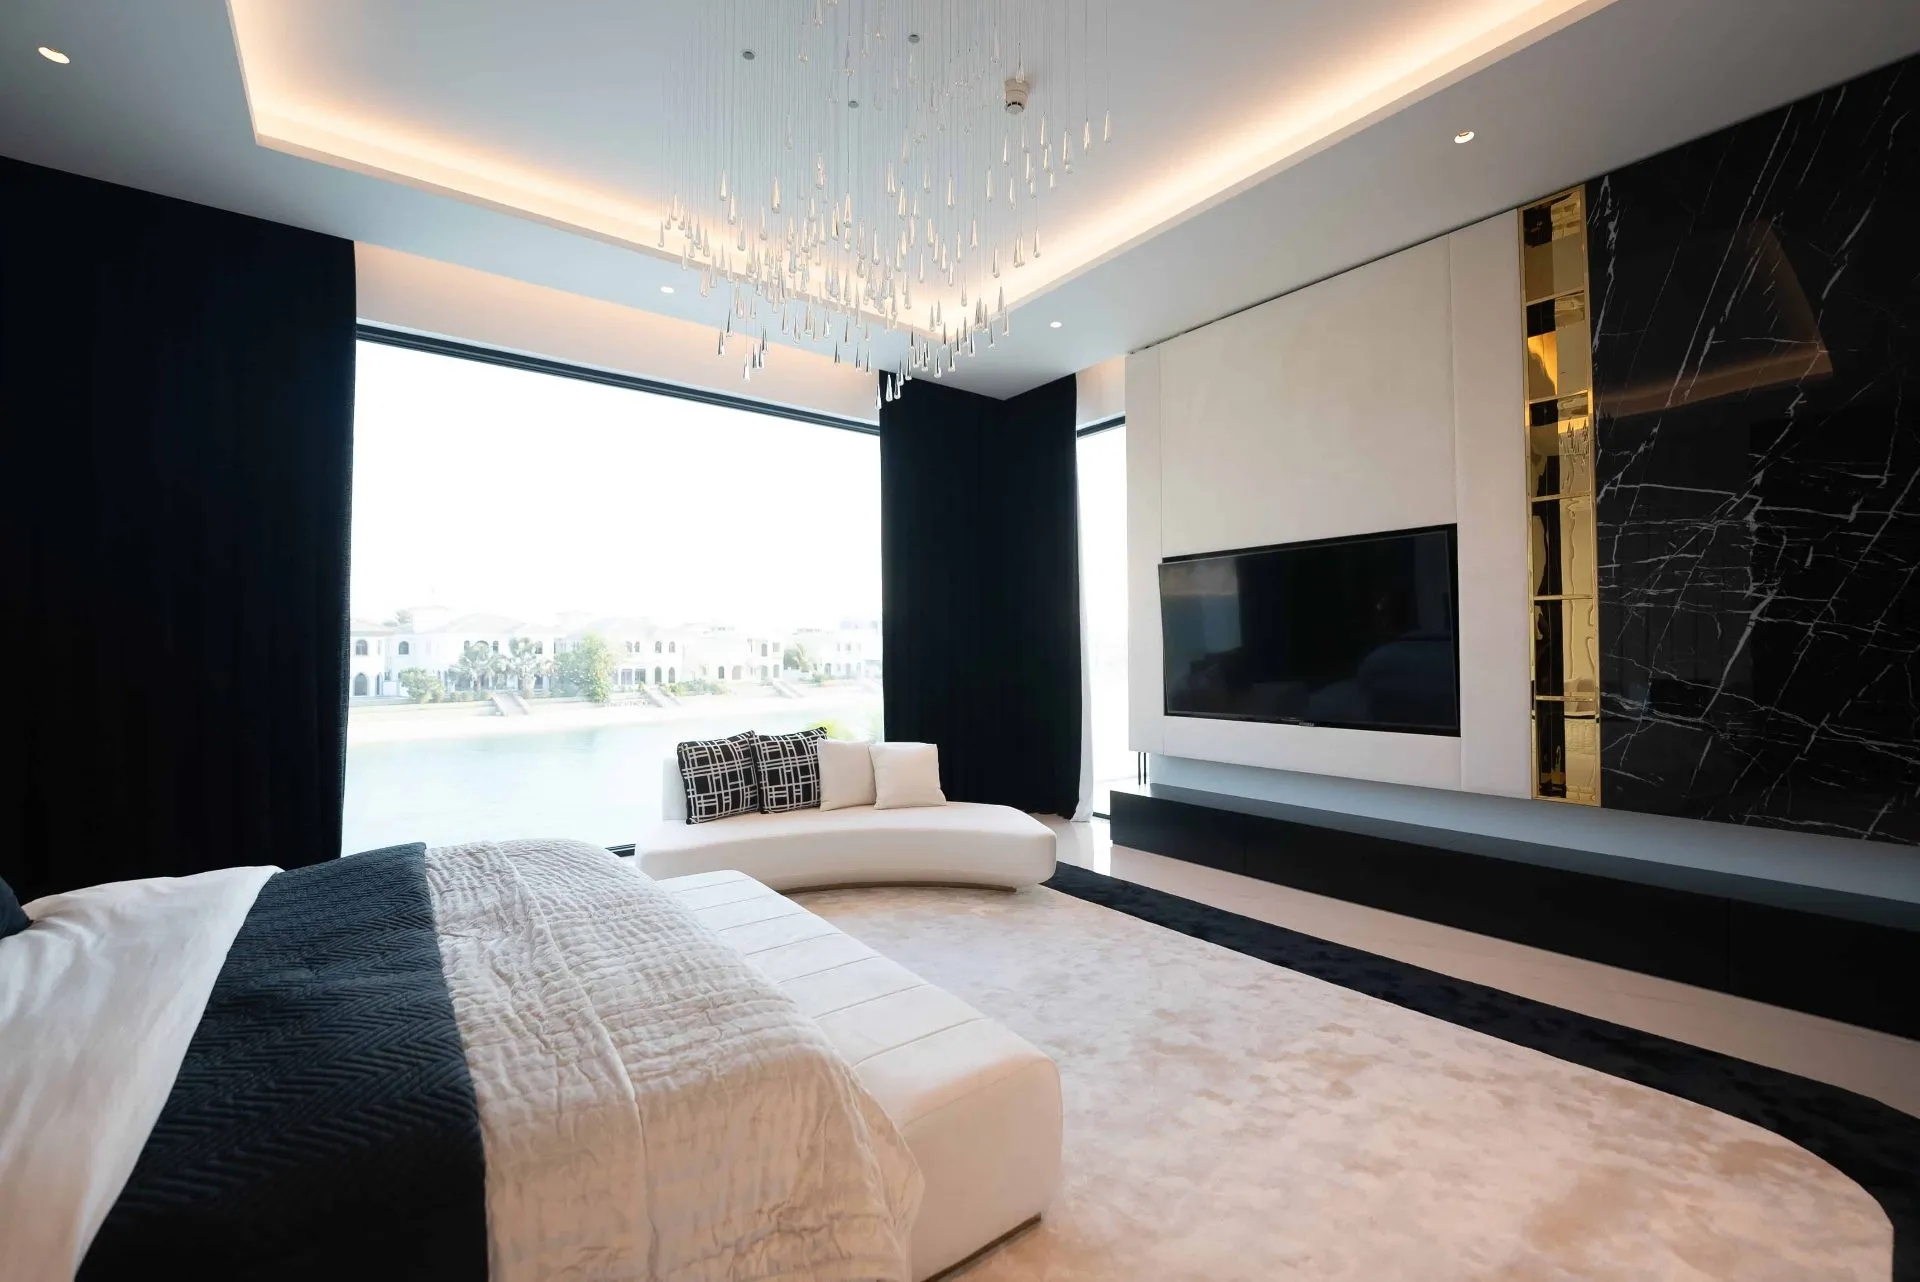 A stylish bedroom with a big TV and a sleek black and white theme.